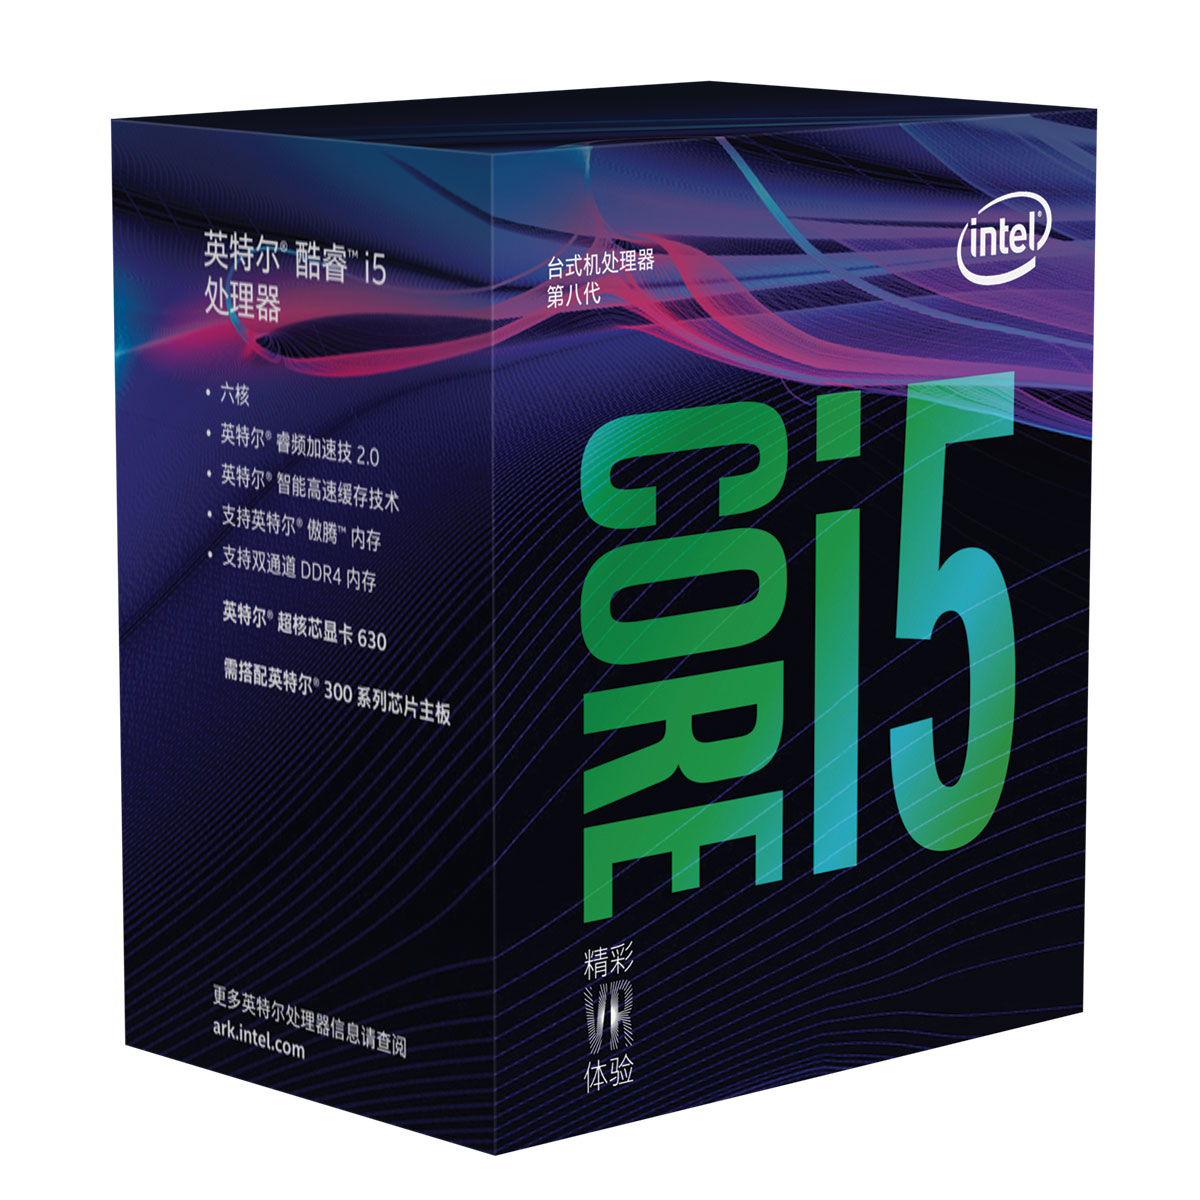 Core i5-8400 (2.8 GHz)